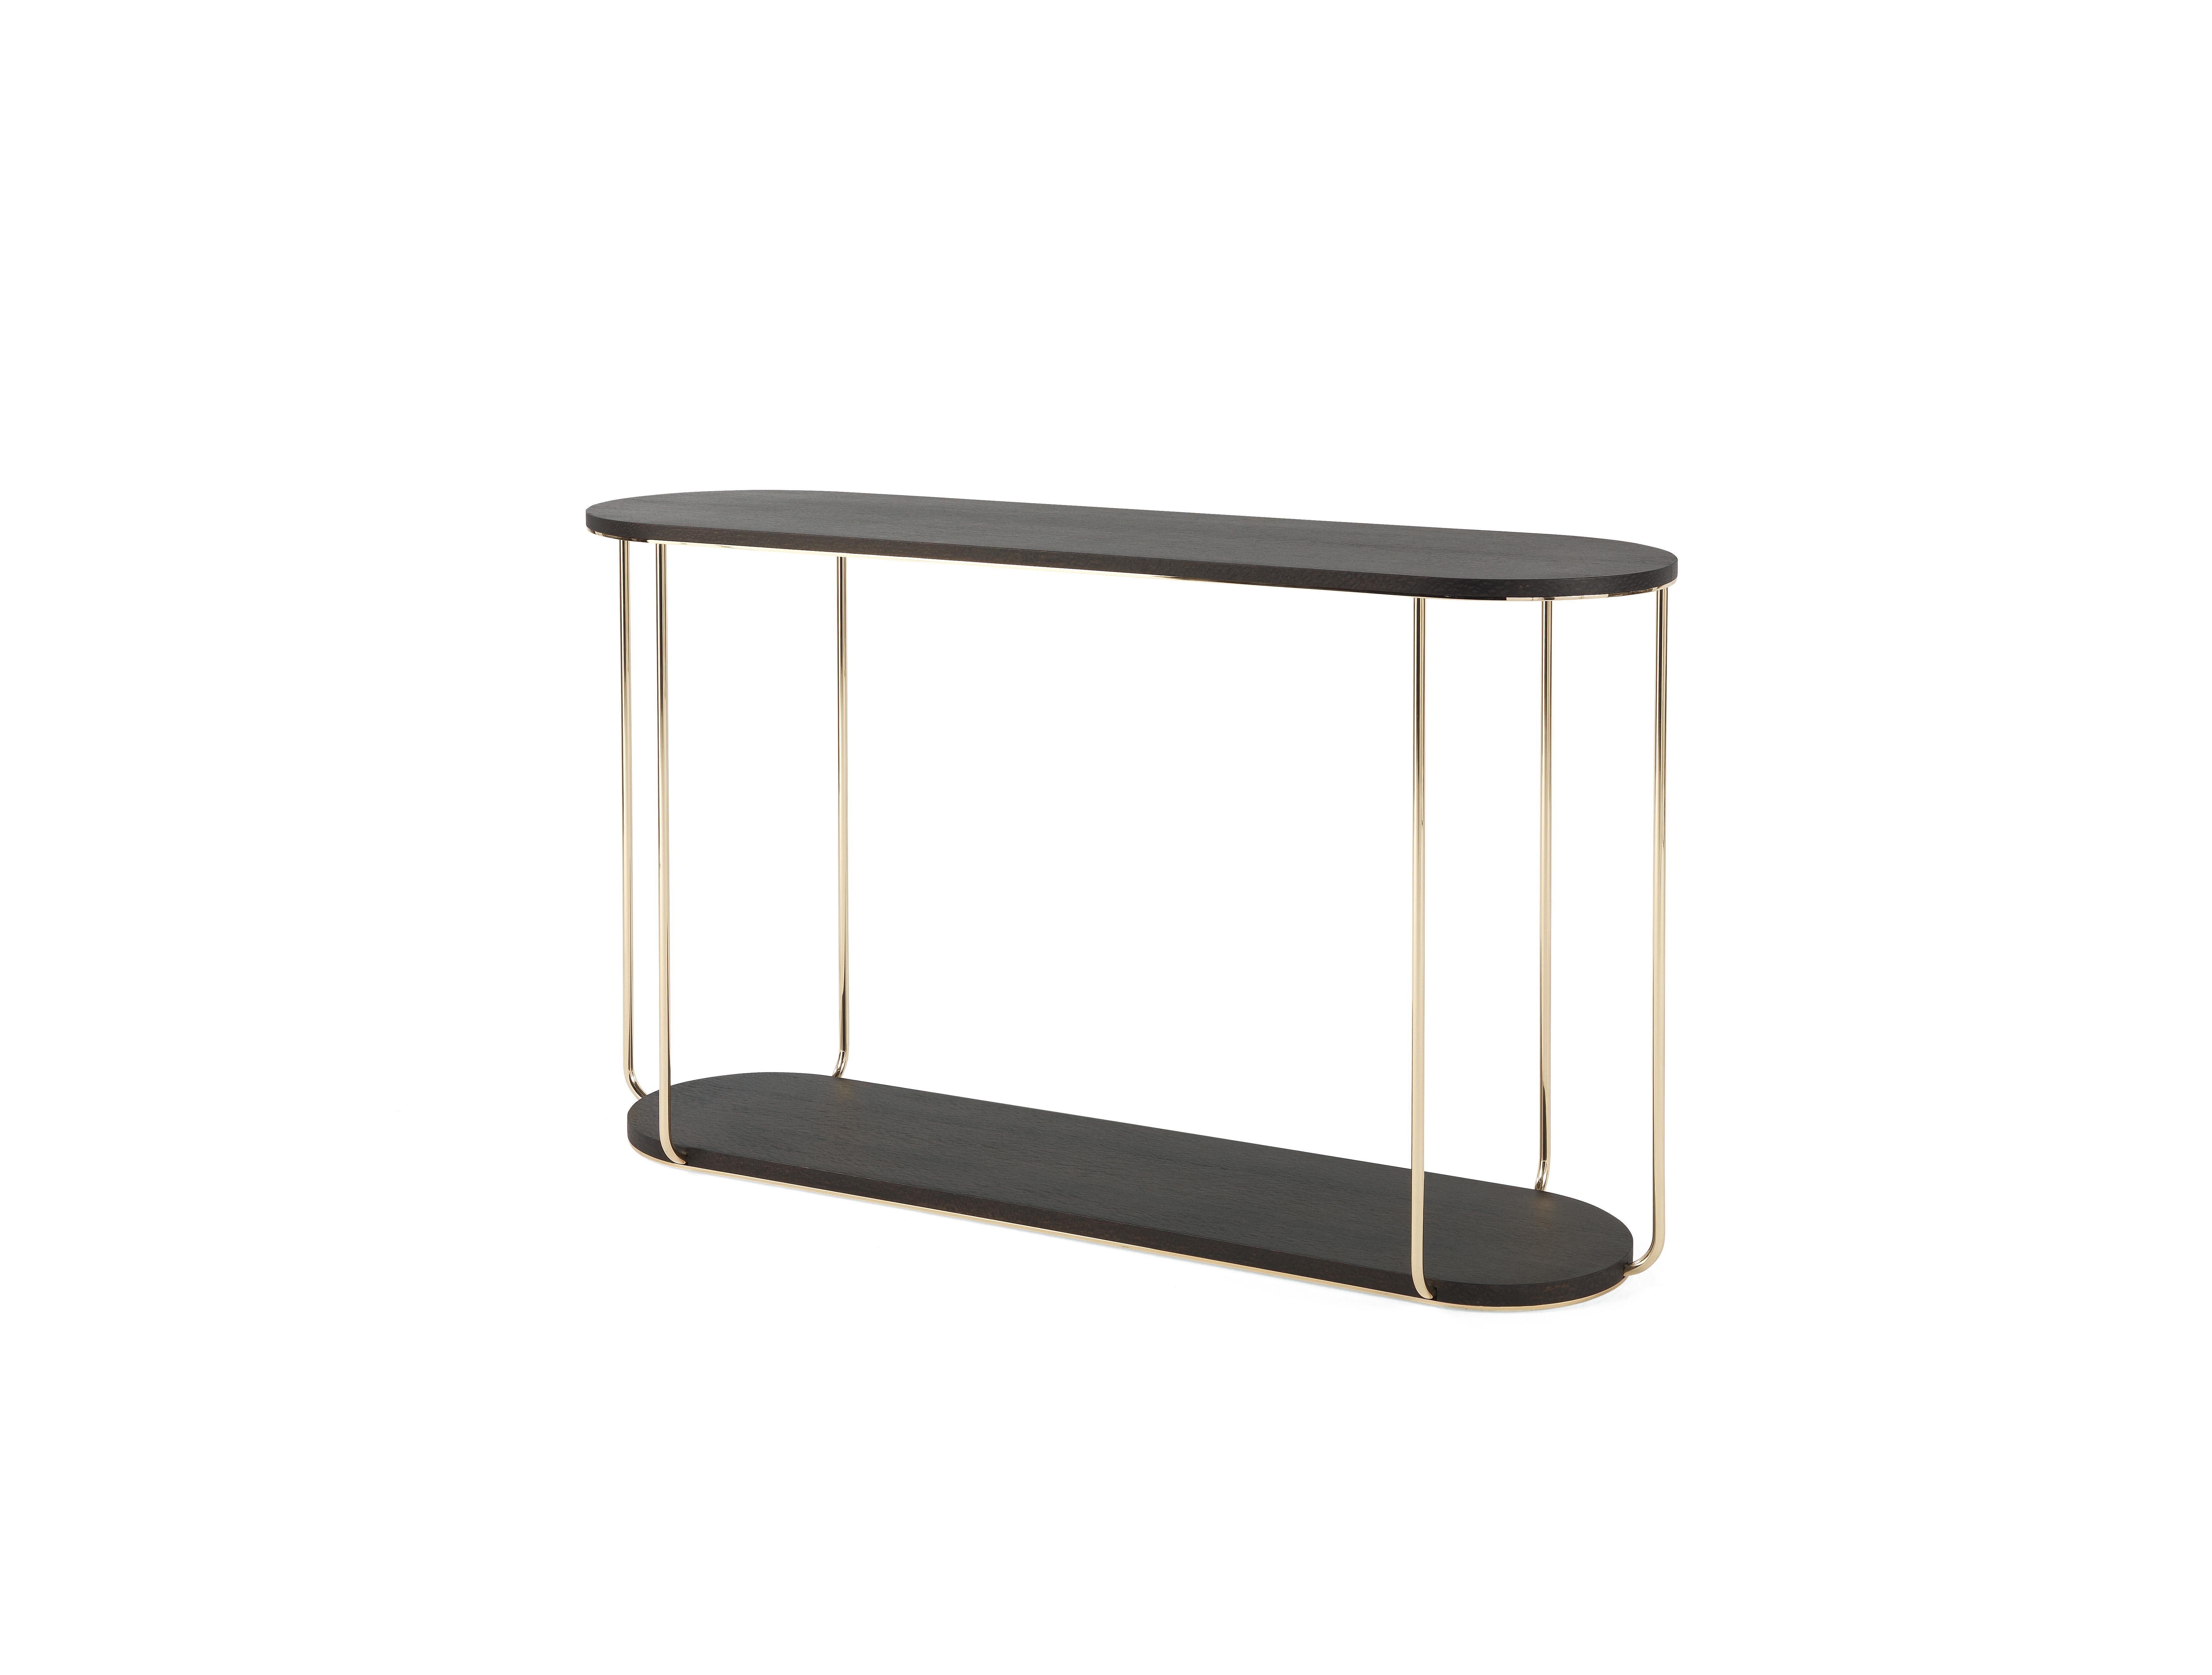 Ethnic accents and African references for the Ambar console, whose structure consists of a base and top in precious Carbalho wood evoke the typical African percussion. The thin structure in polished brass contrasts with the materiality of the wood